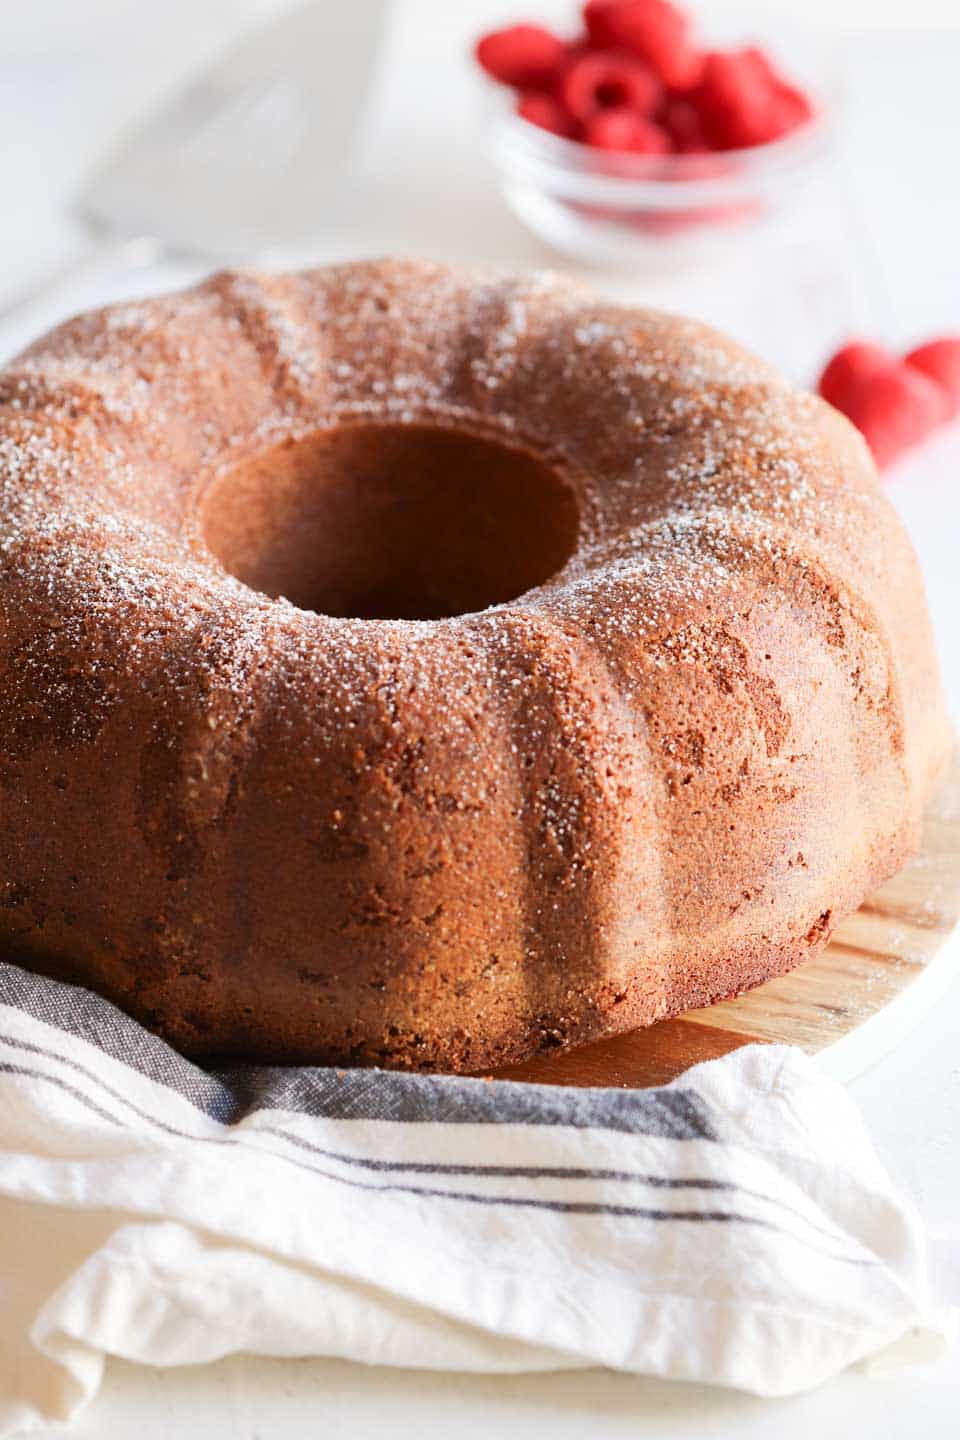 a whole white chocolate bundt cake dusted with powdered sugar